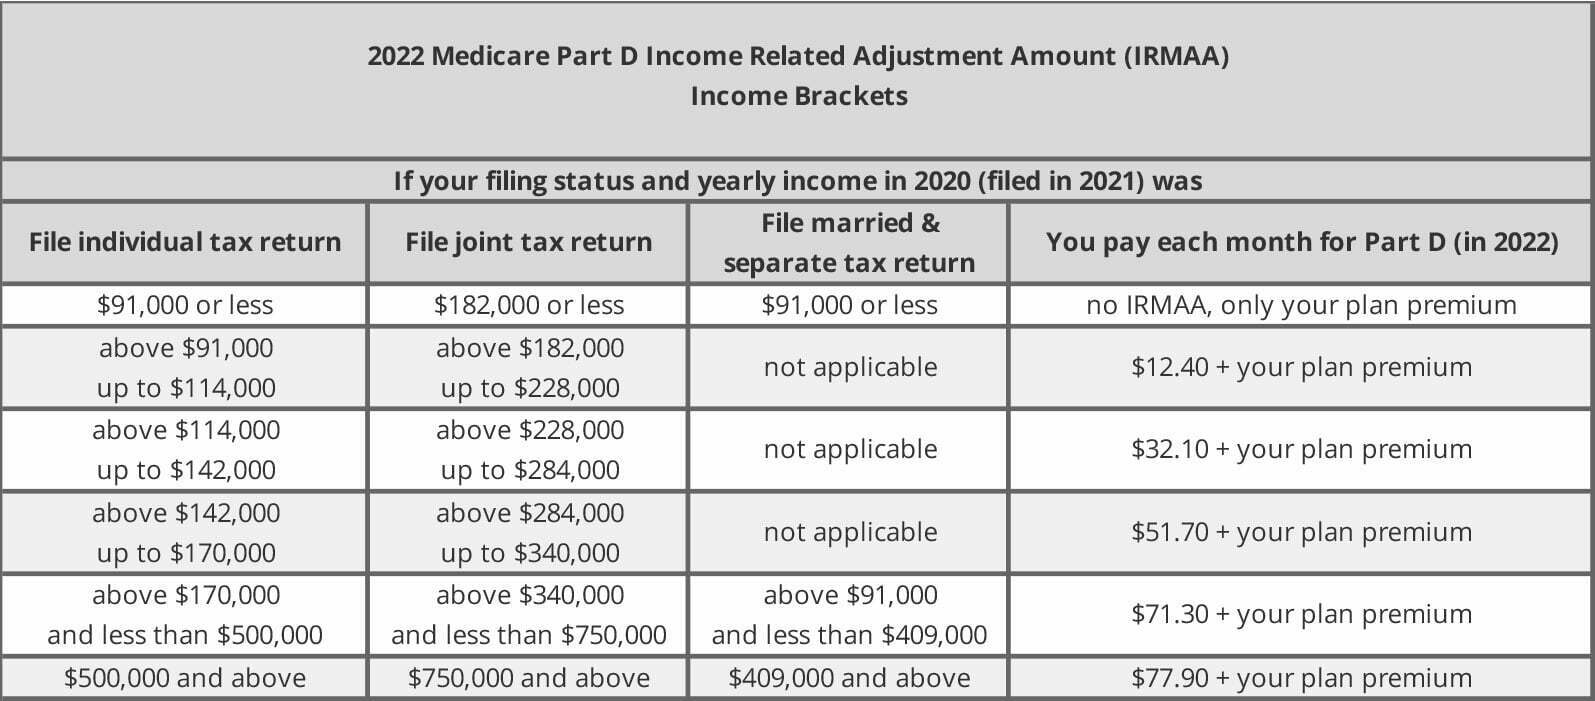 What Is the 2022 Medicare Part B Premium and What Are the 2022 IRMAA Brackets? Prepare for